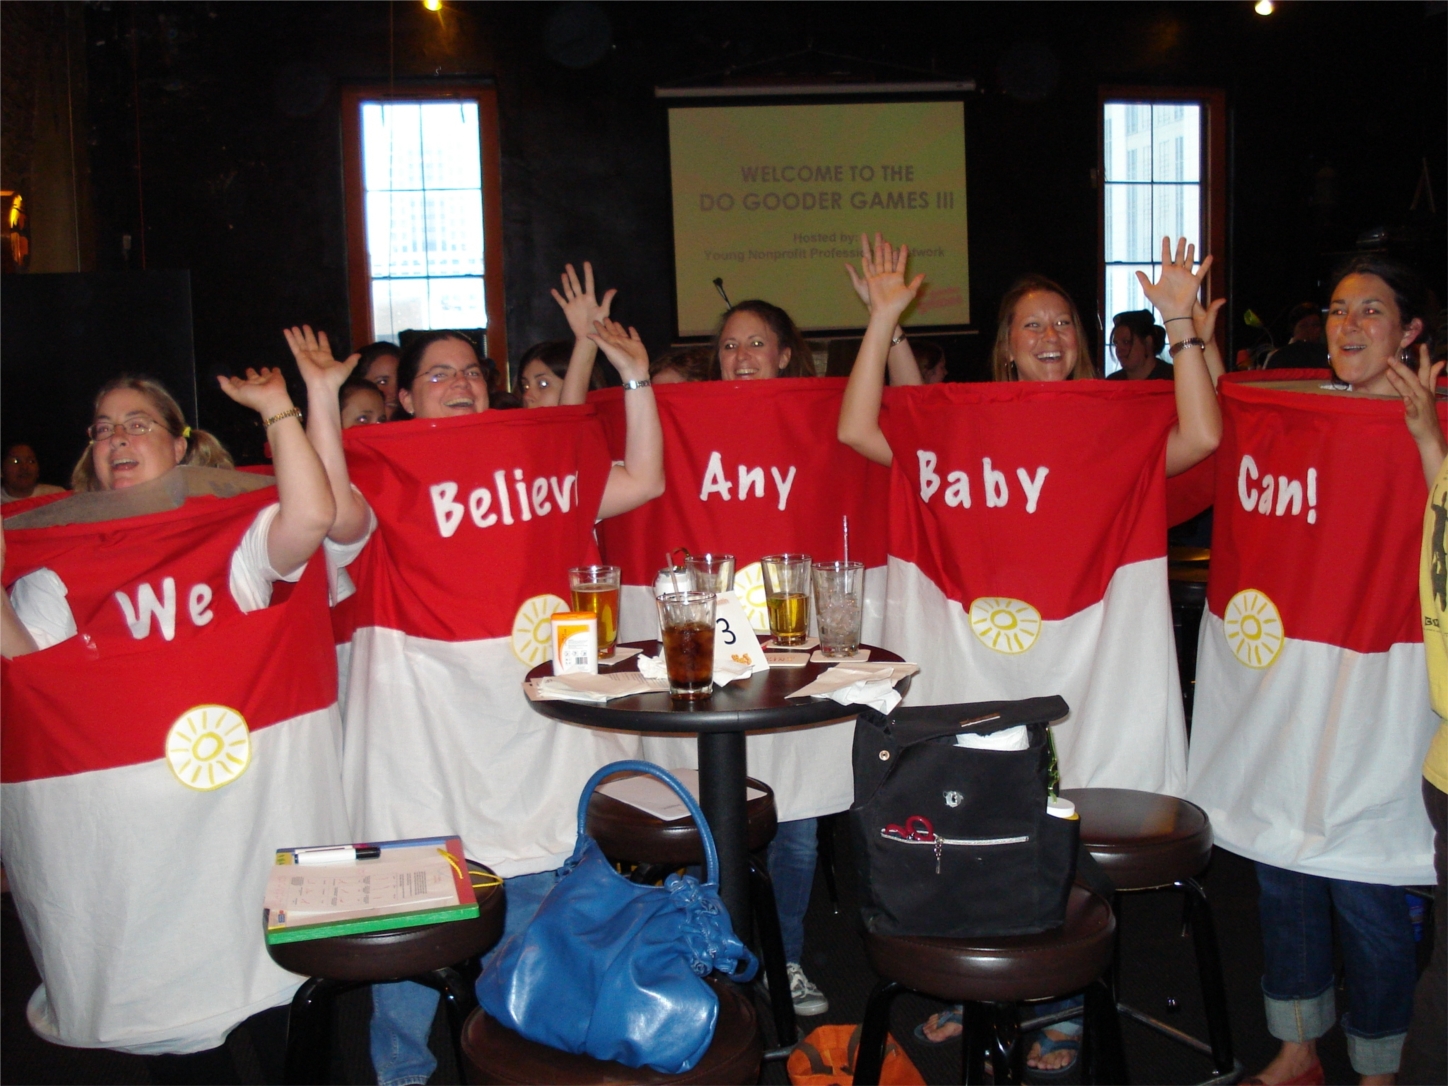 They know how to have fun!! ABC staff don “We Believe Any Baby Can” cans as they participate in the Do-Gooder Games, hosted by the Young Nonprofit Professionals Network.